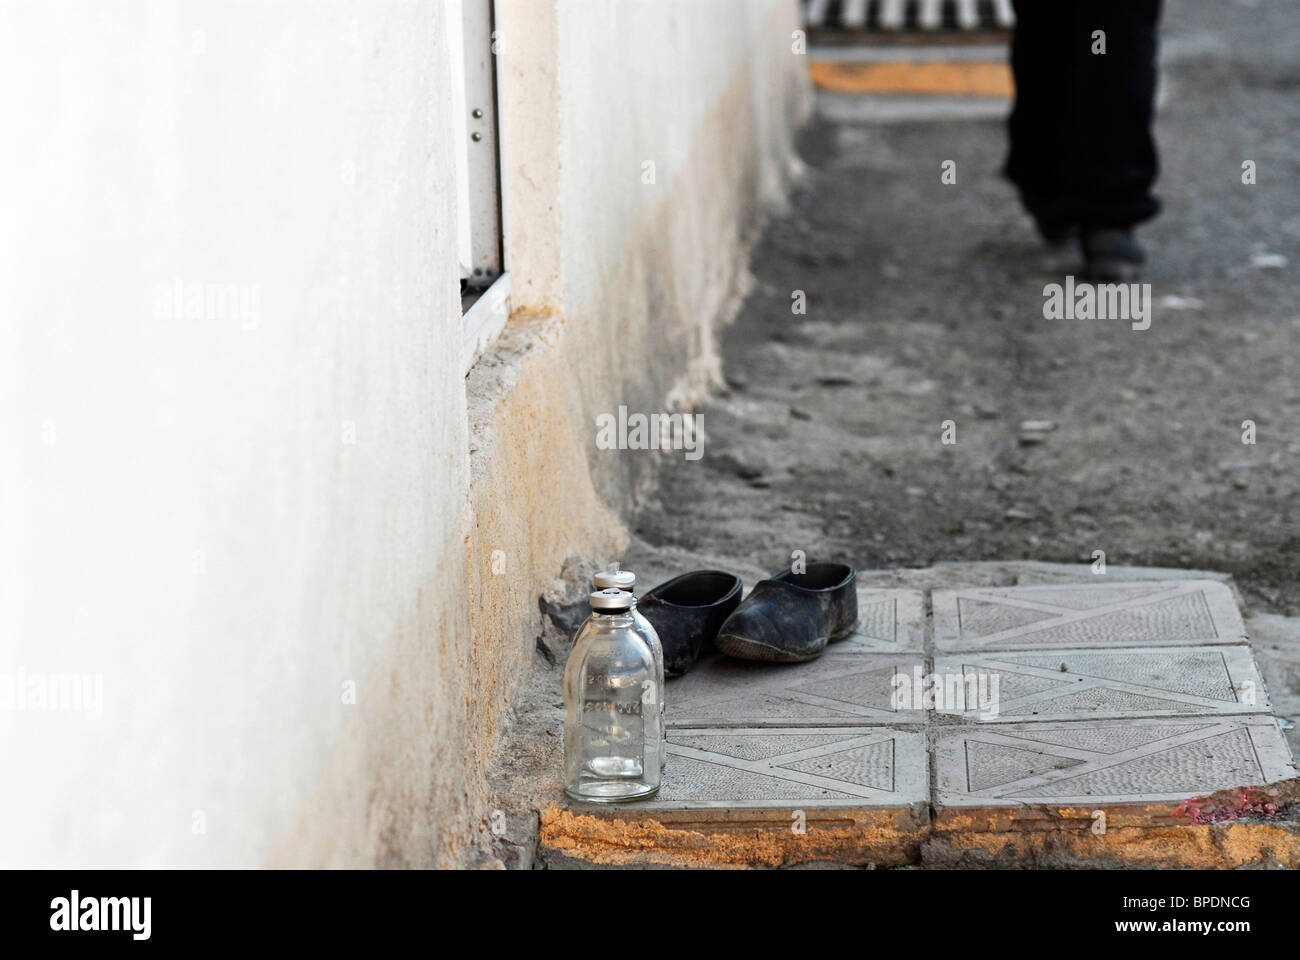 Azerbaijan, Xinaliq, low section view of person walking with pair of shoes and bottle Stock Photo